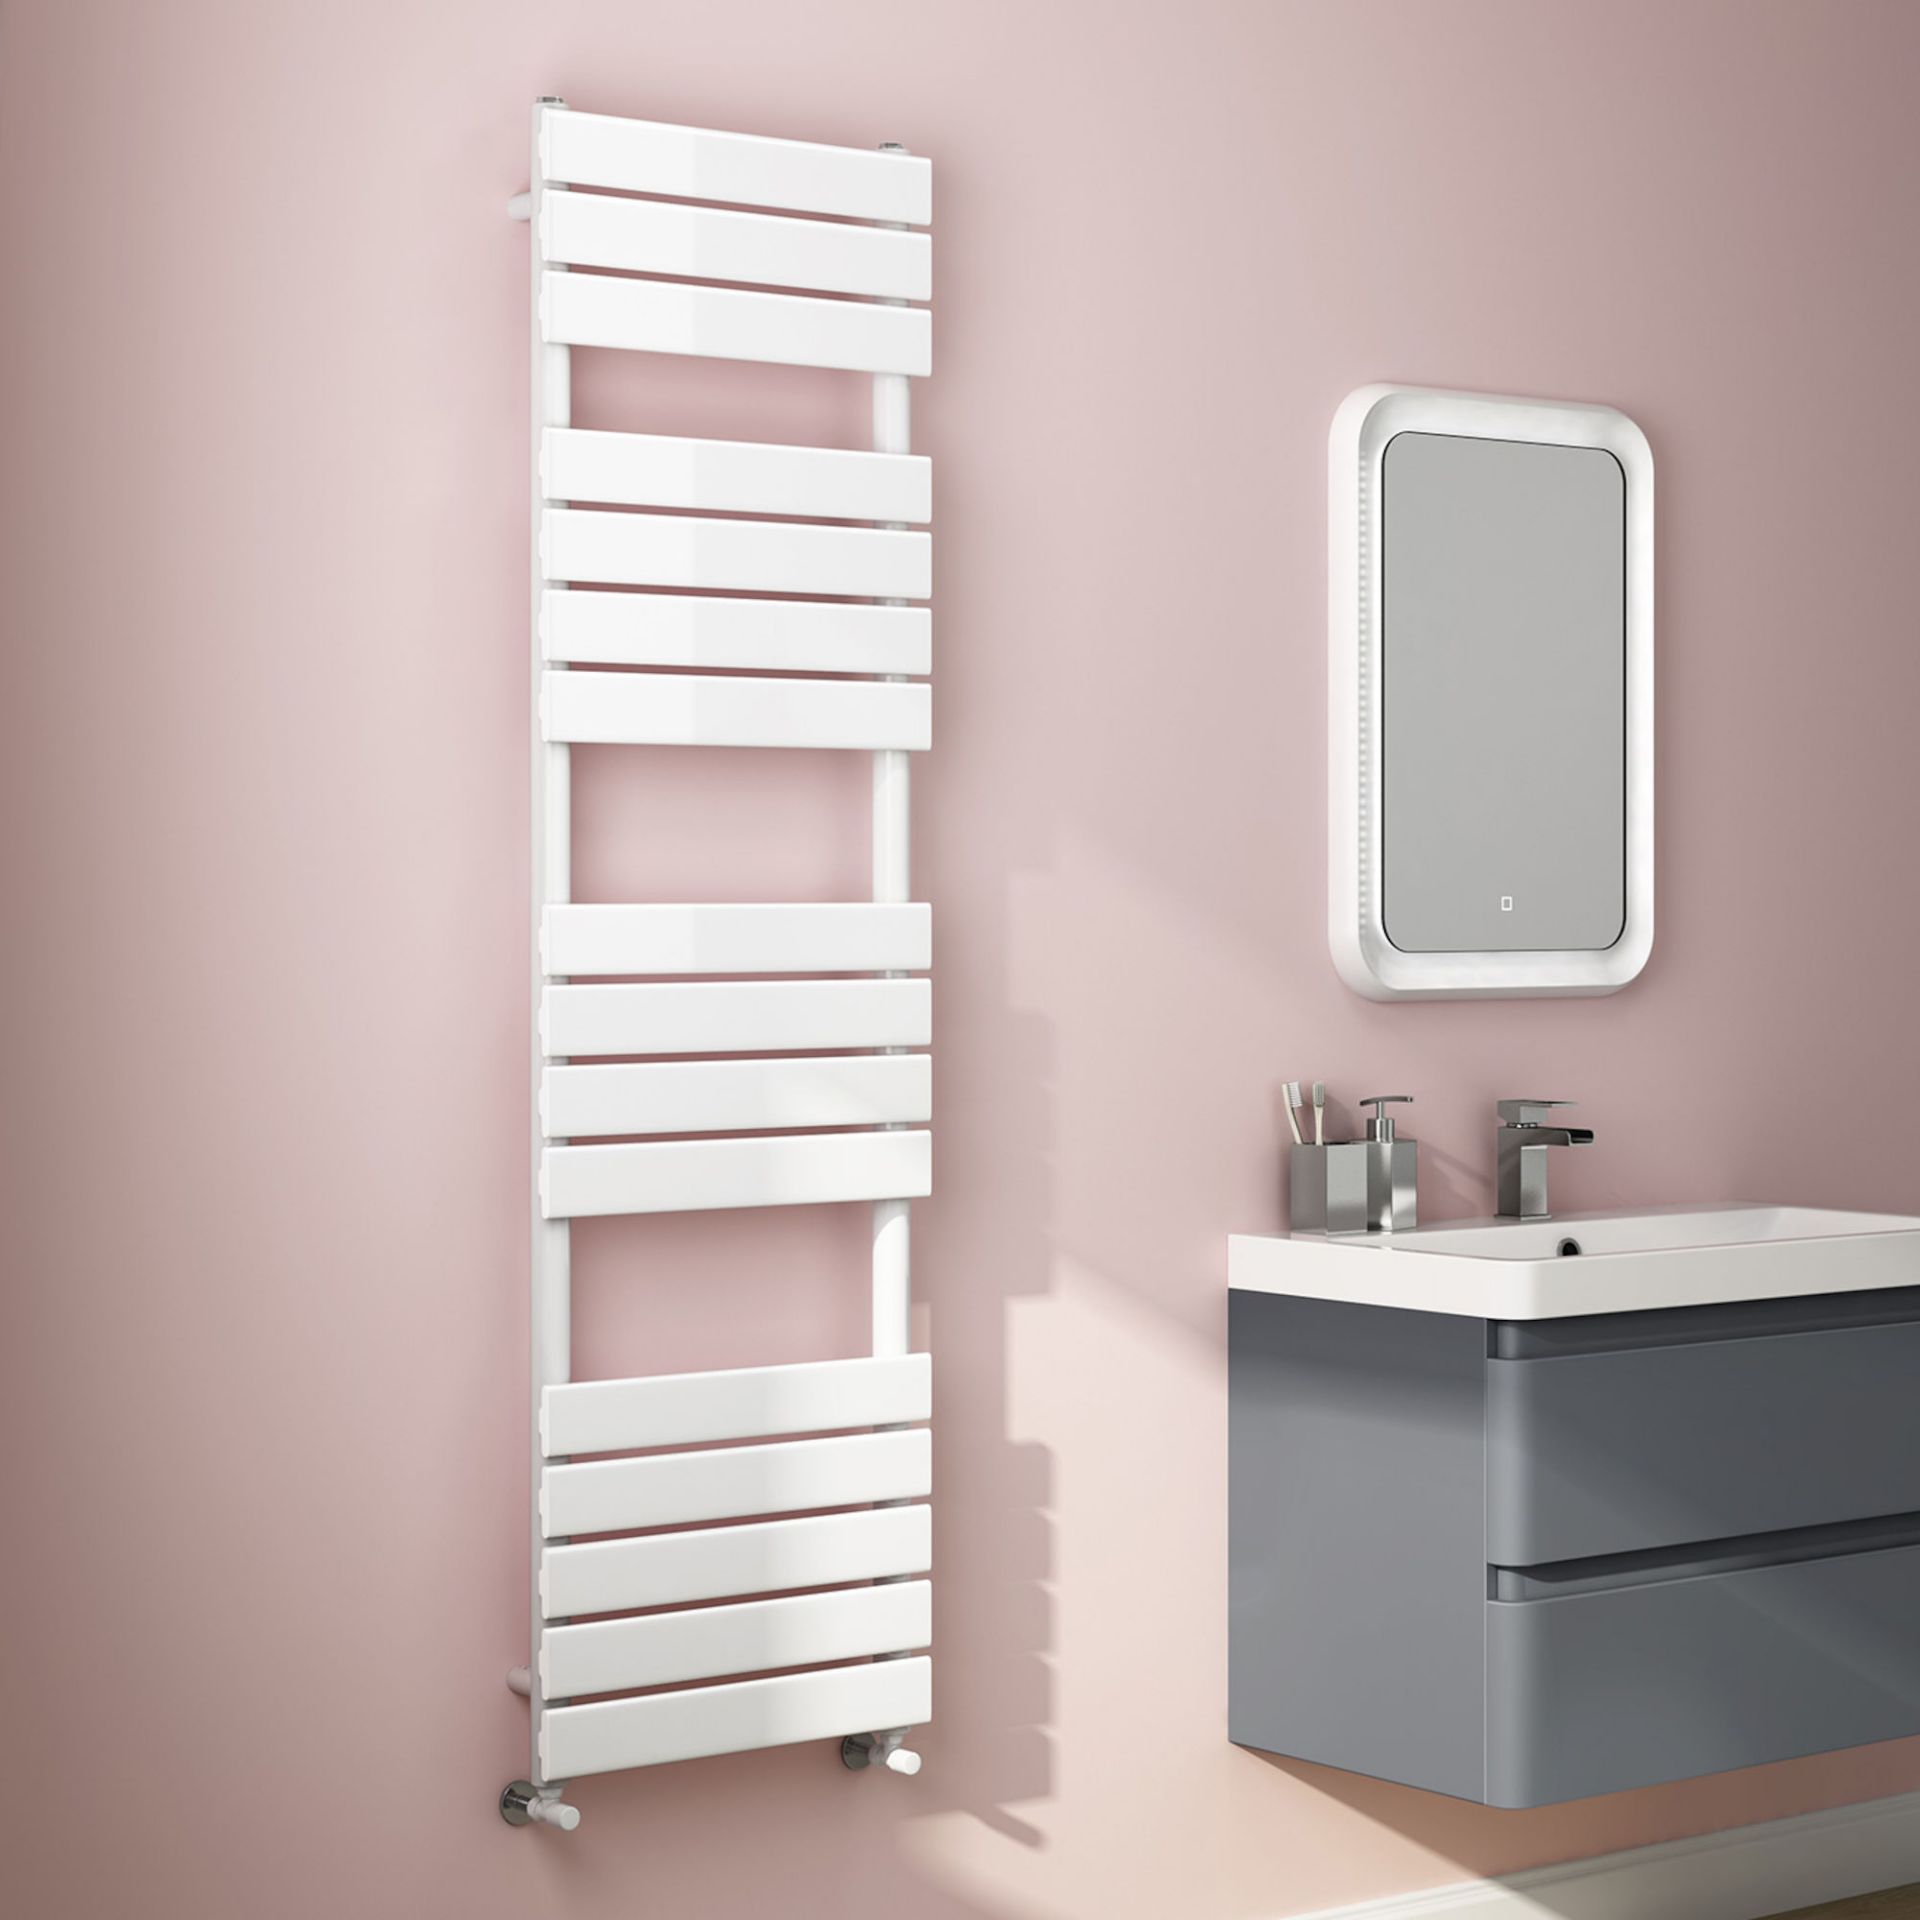 (CS111) 1600x450mm White Flat Panel Ladder Towel Radiator. RRP £299.99. Made from low carbon steel